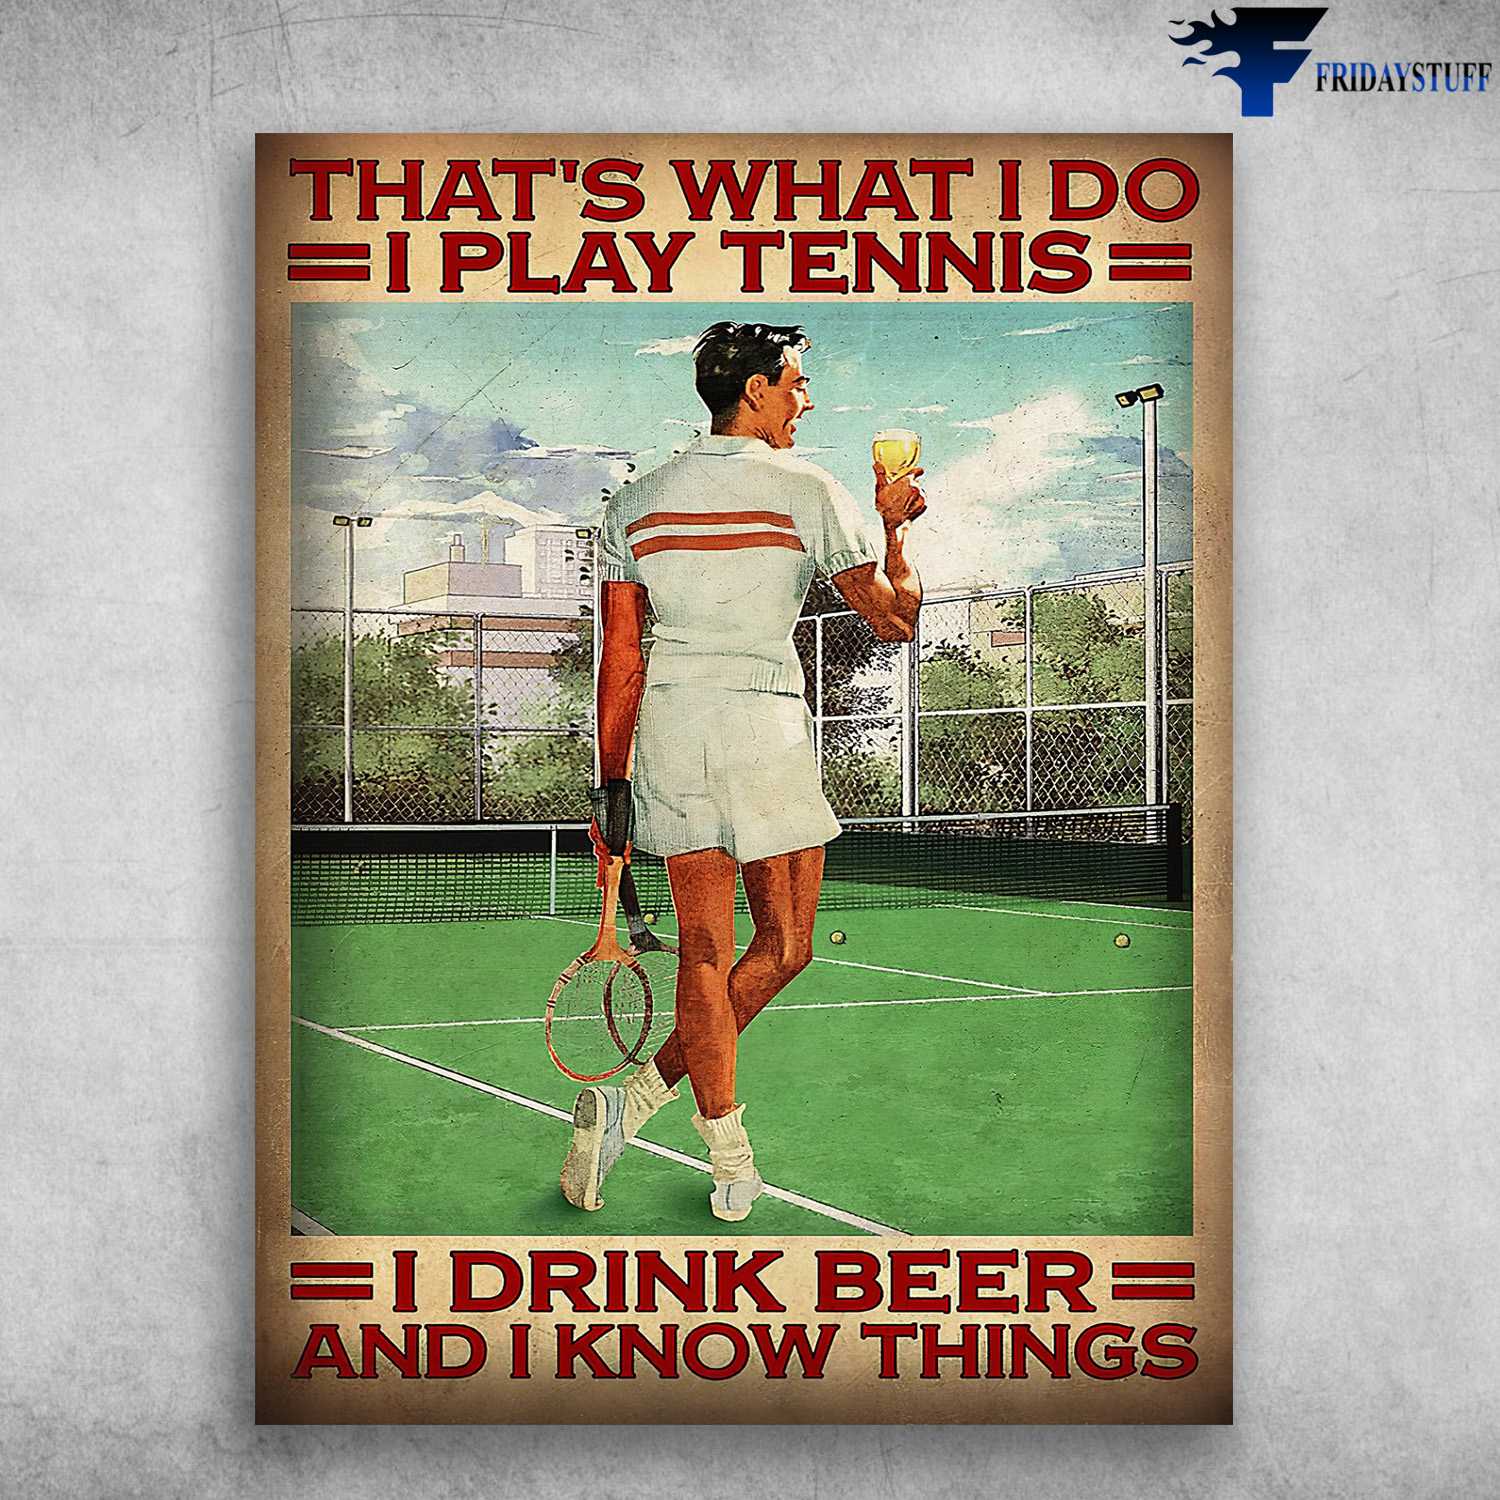 Tennis Player, Man Loves Tennis - That's What I Do, I Play Tennis, I Drink Beer, And I Know Things